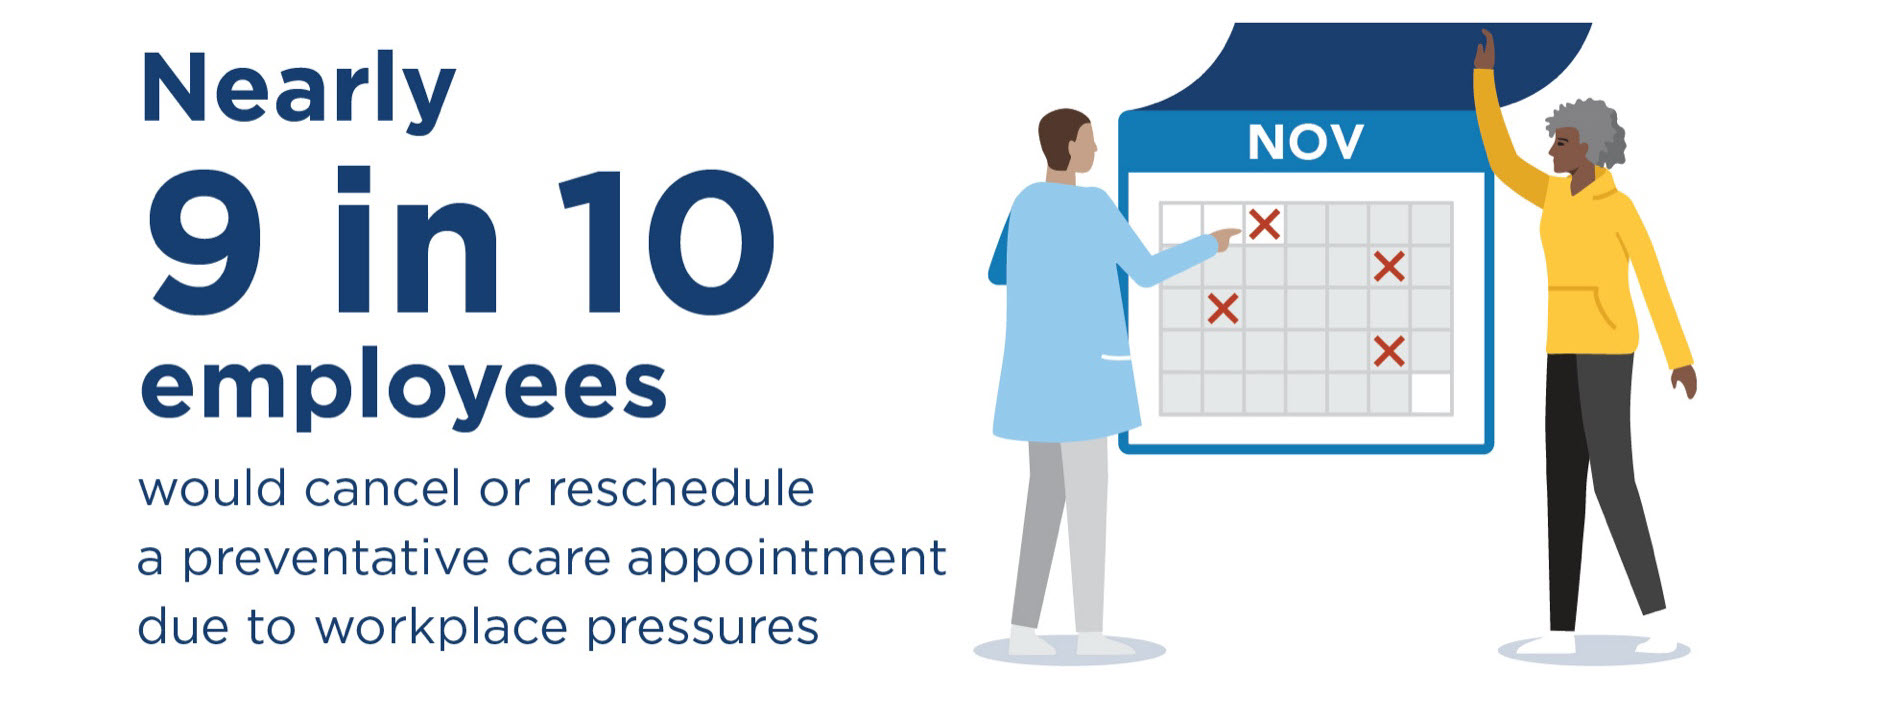 Illustration of a patient and medical clerk making an appointment on a calendar, with caption: Nearly 9 in 10 employees would cancel or reschedule a preventive care appointment due to workplace pressures